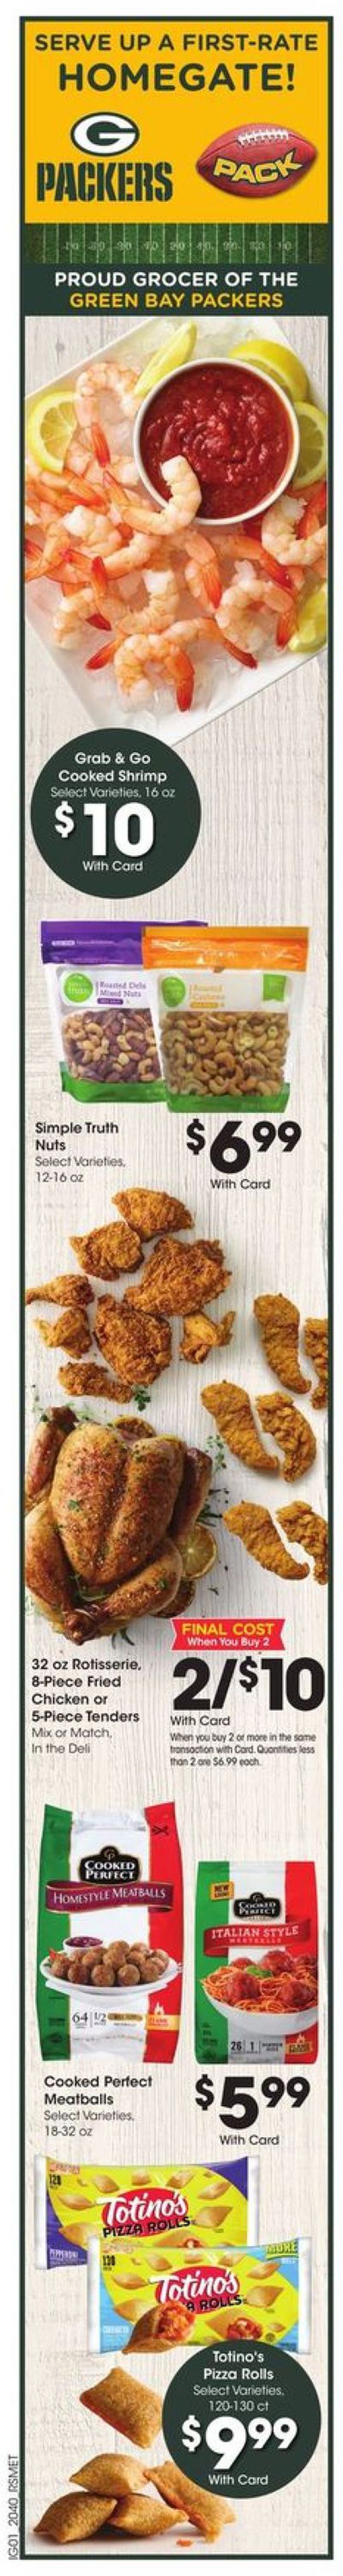 Pick ‘n Save Ad from 10/28/2020